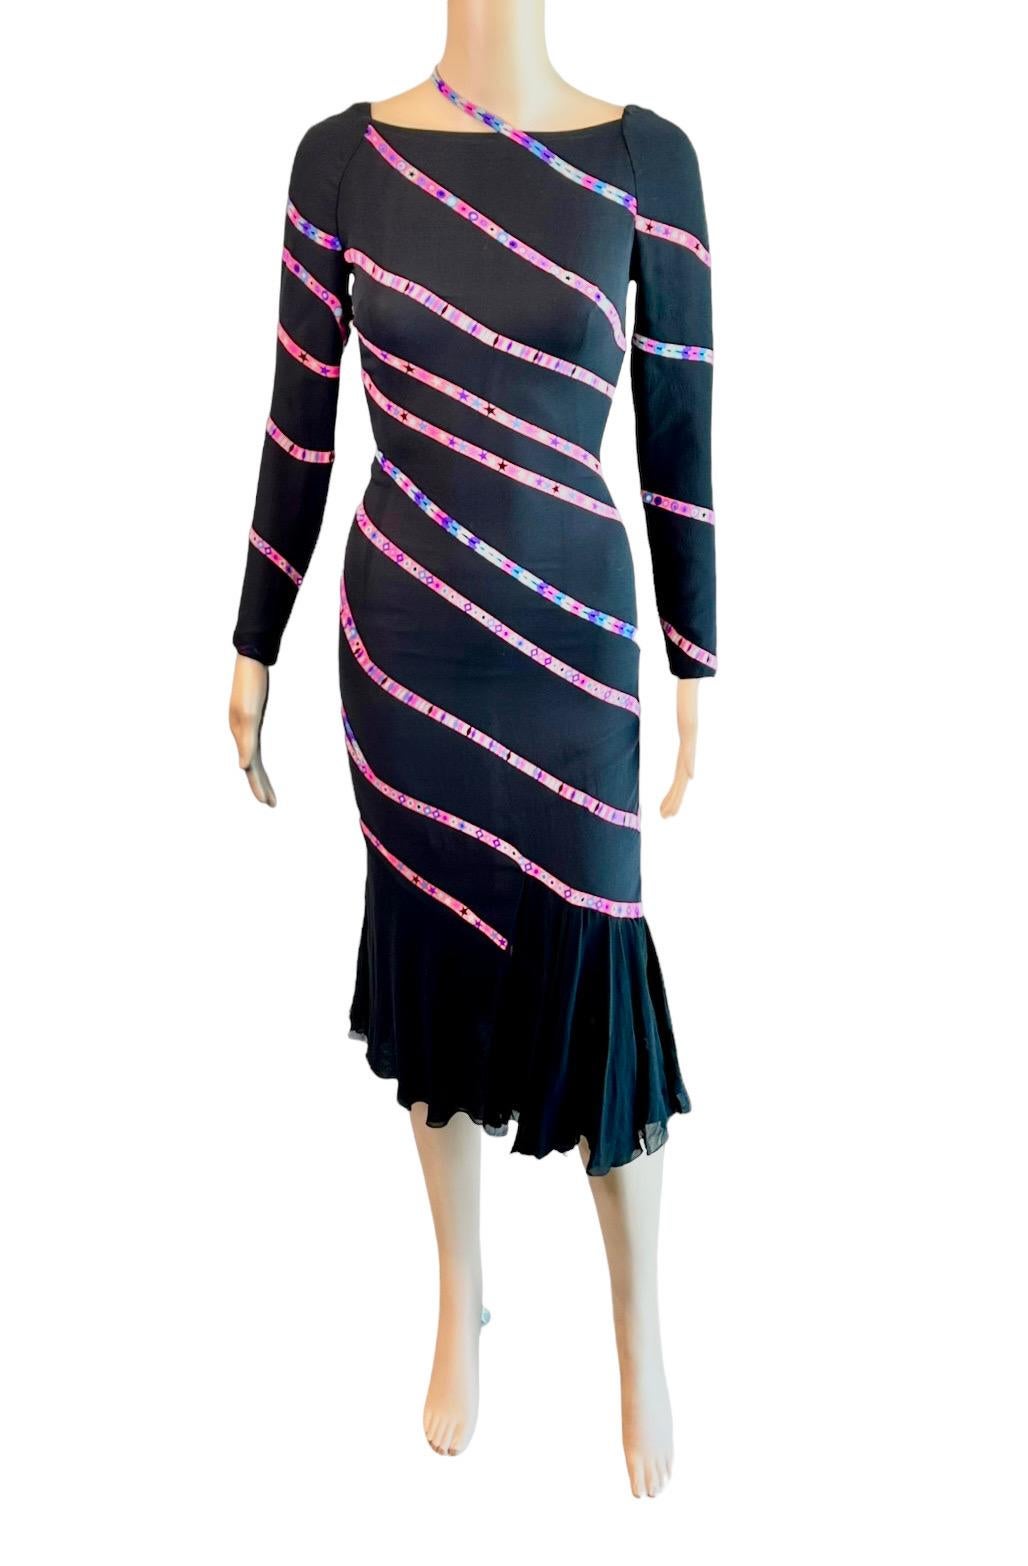 Gianni Versace F/W 2002 Runway Editorial Campaign Ribbon Midi Dress In Good Condition For Sale In Naples, FL